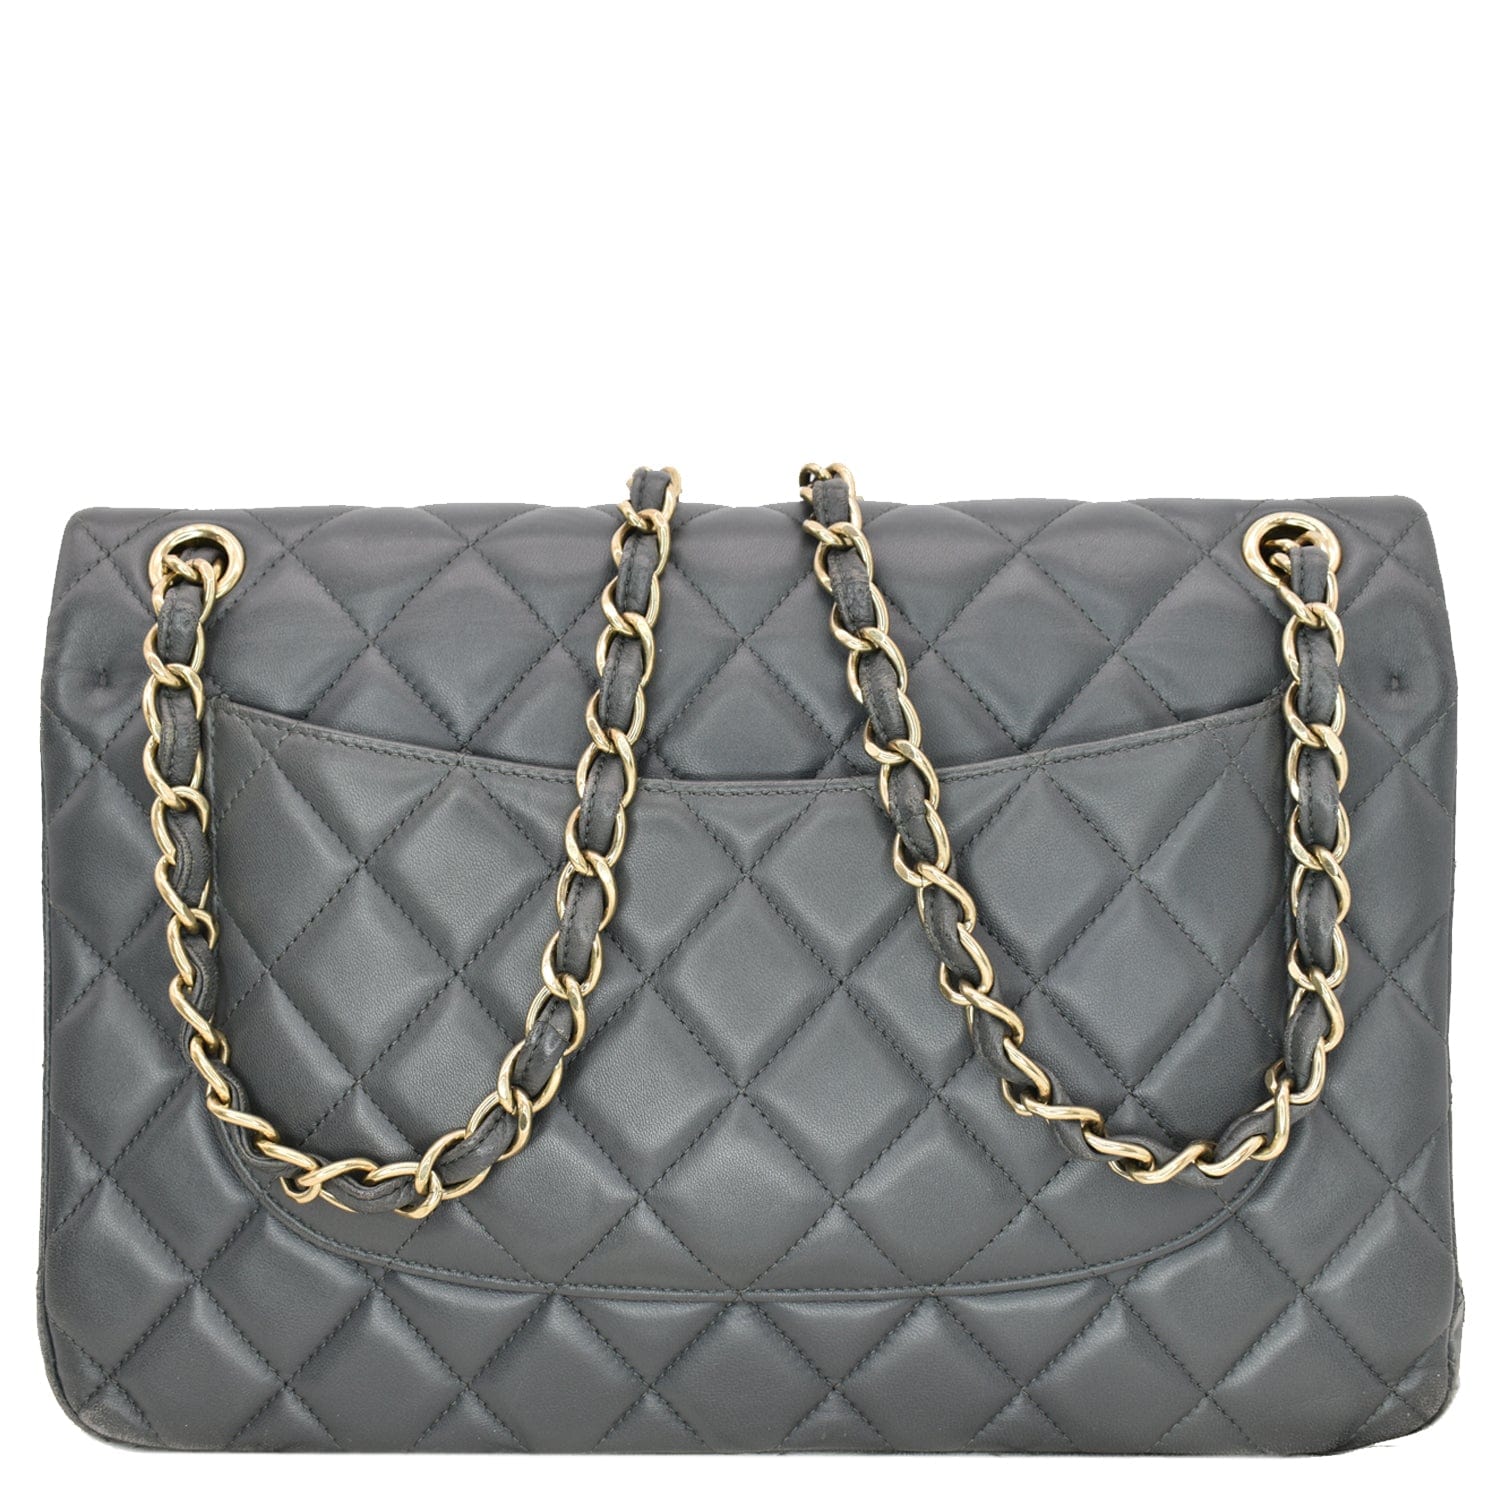 CHANEL Classic Flap Turn Lock Bags & Handbags for Women, Authenticity  Guaranteed